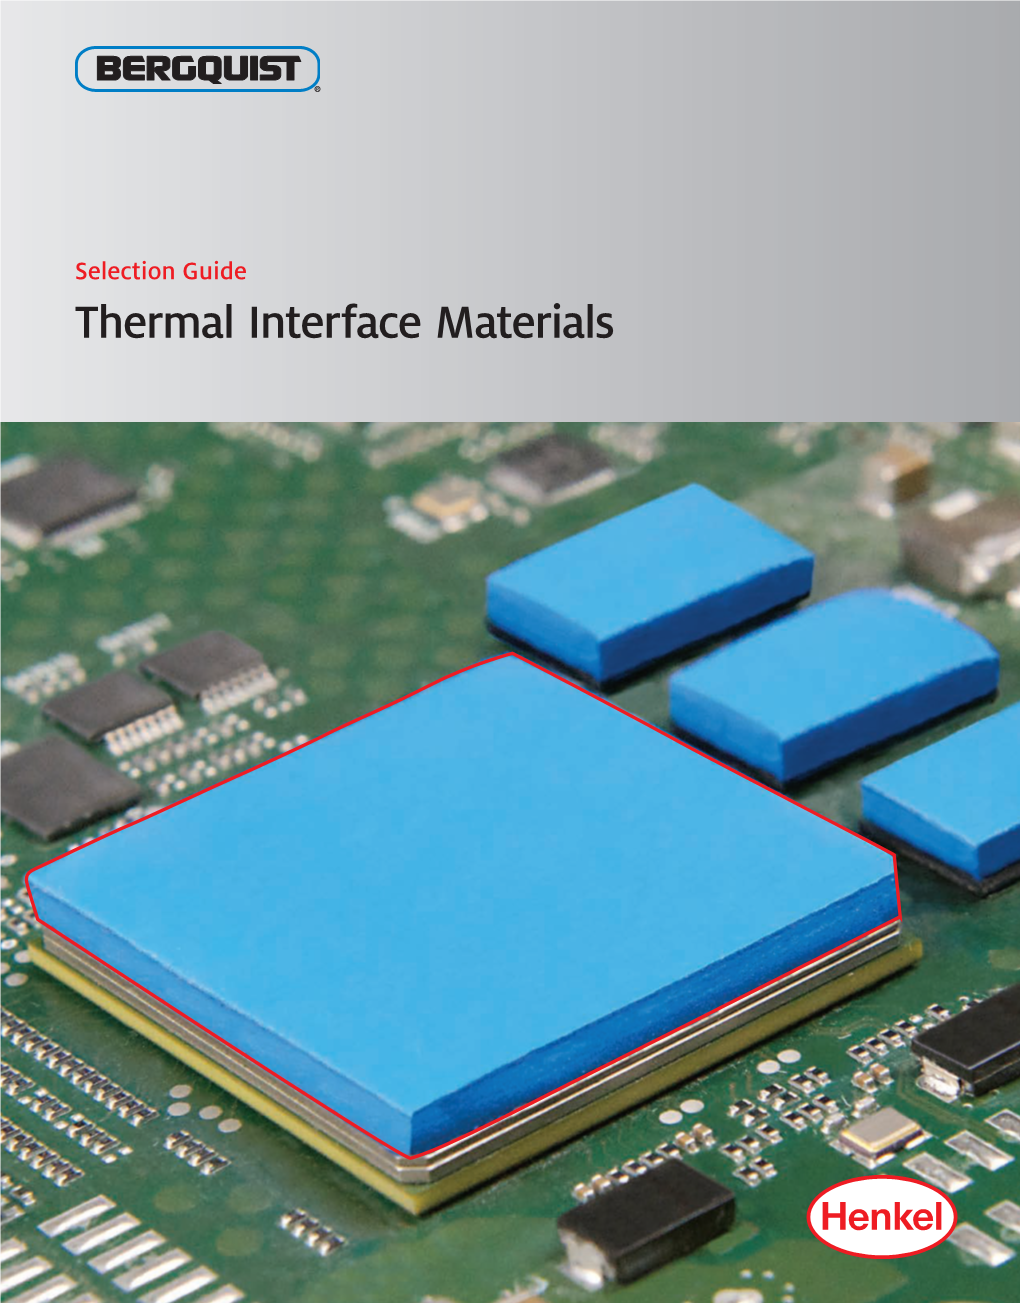 Thermal Interface Materials Table of Contents